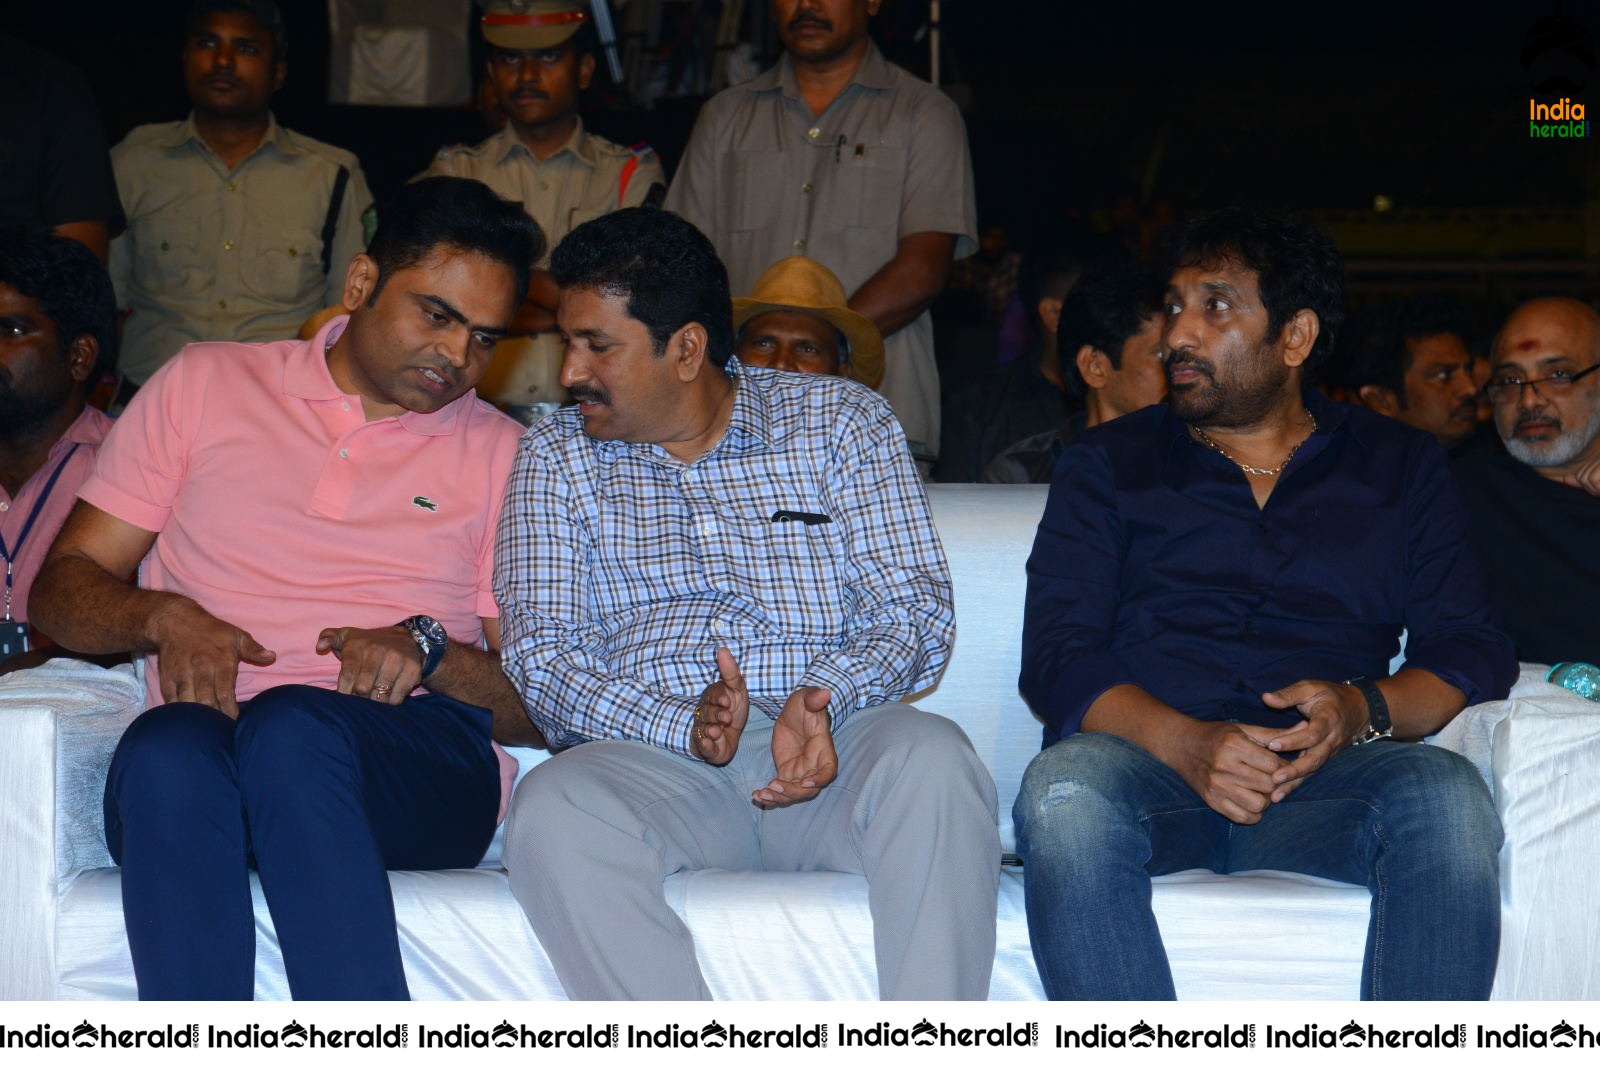 Some More Candid moments from Sarileru Neekevvaru event Set 3